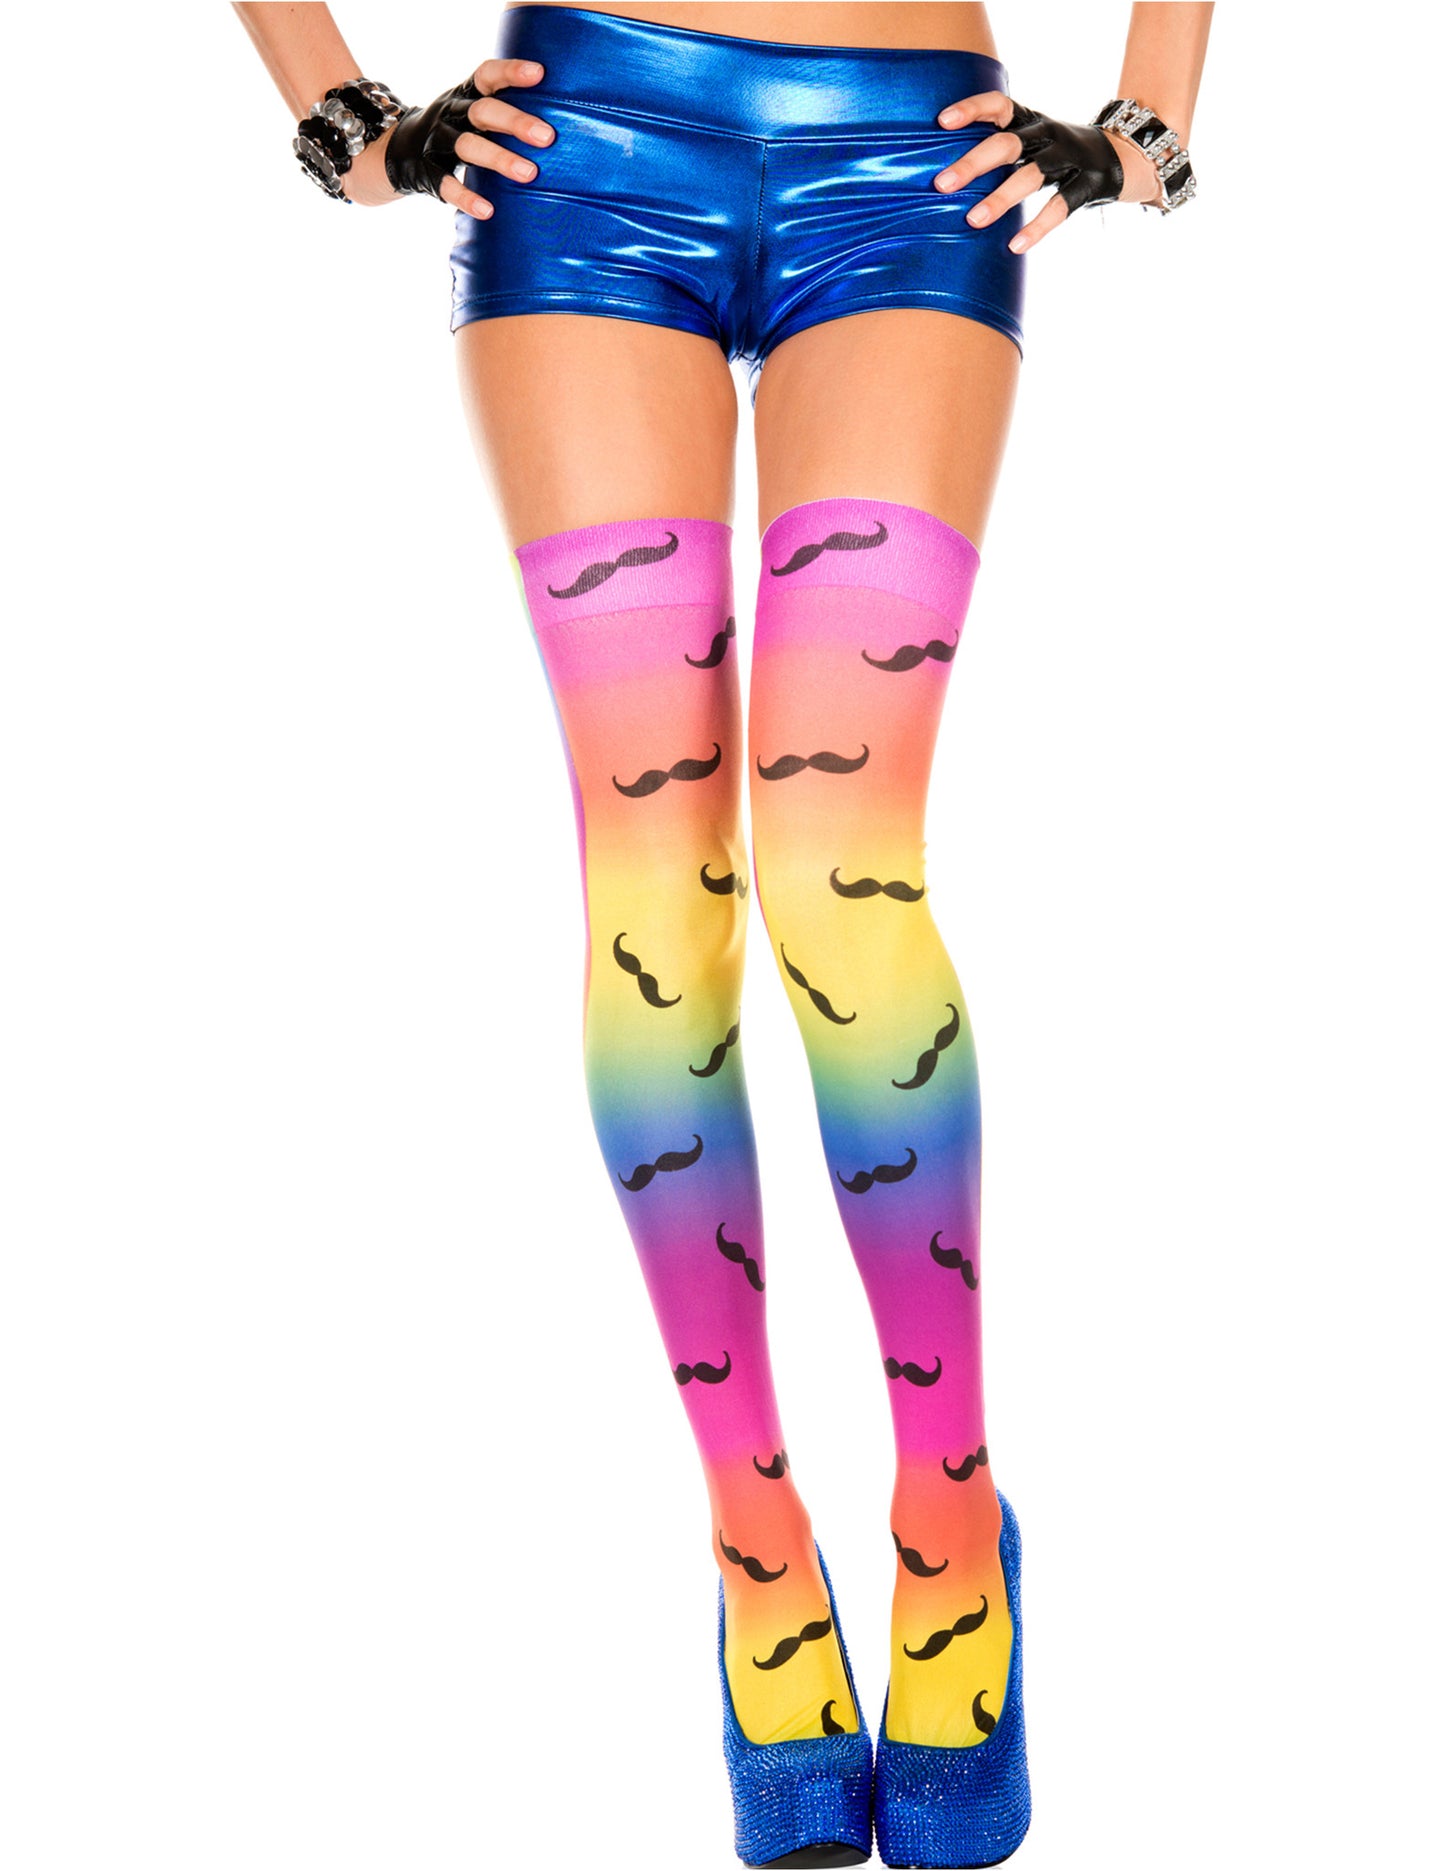 Rainbow Colored Thigh High Stockings with Mustache Print, One Size